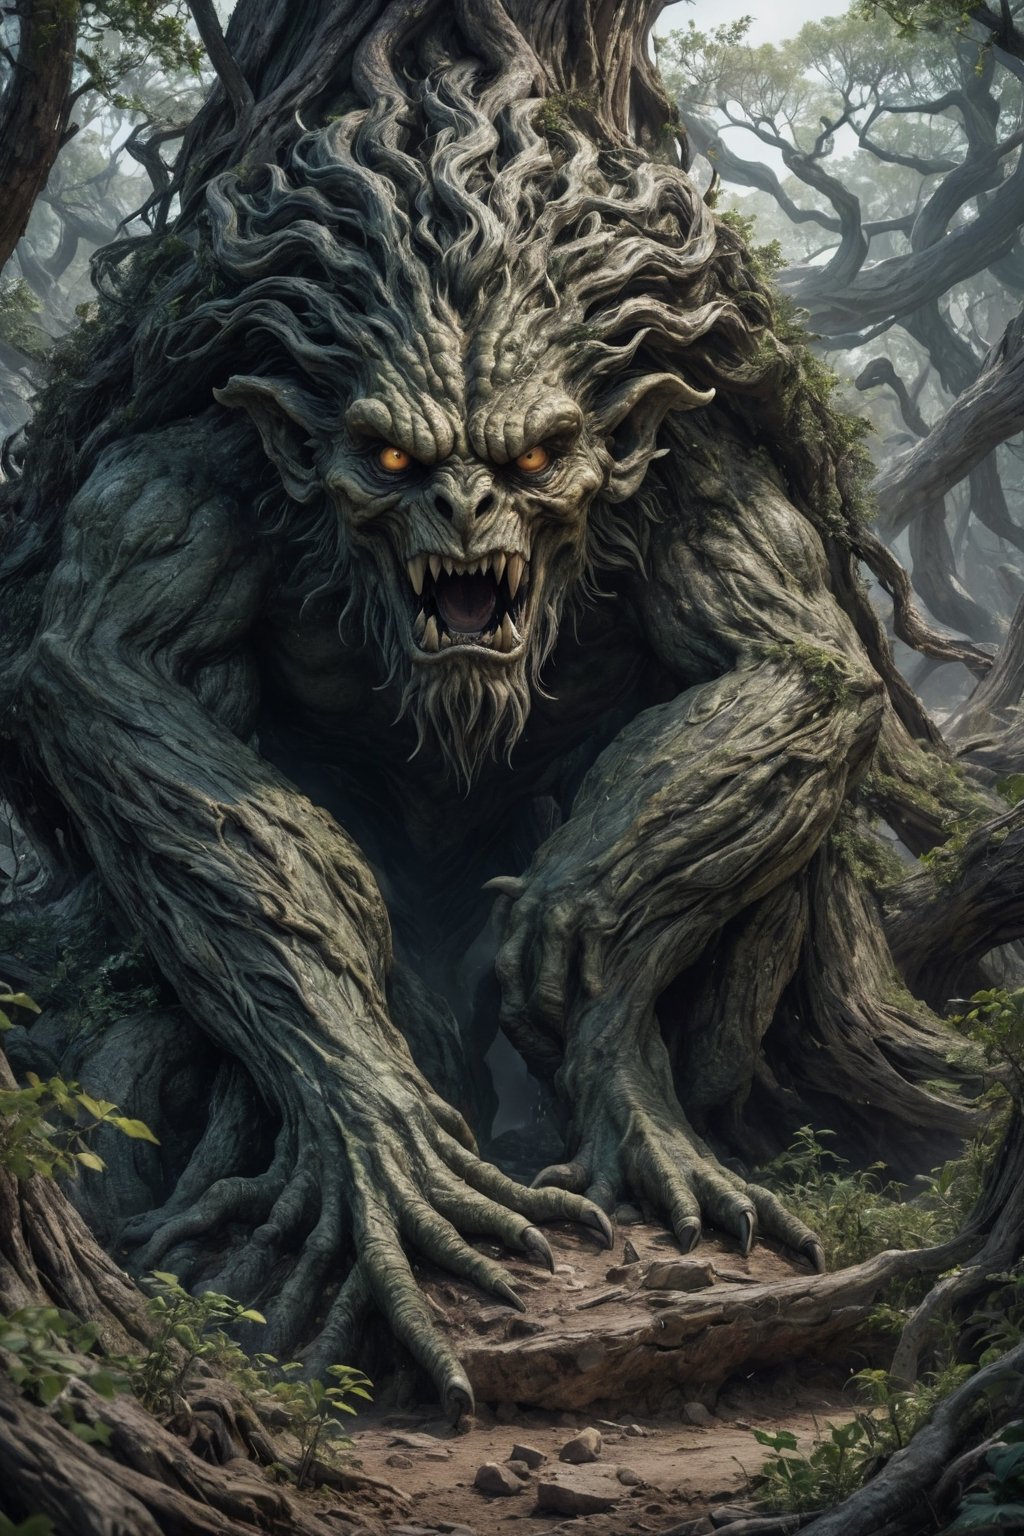 Generate hyper realistic image of a cursed gorgon metamorph Persian monster unveiling its monstrous visage in a petrified forest. Convey the eerie transformation as the creature reveals its petrifying gaze amid the twisted trees.